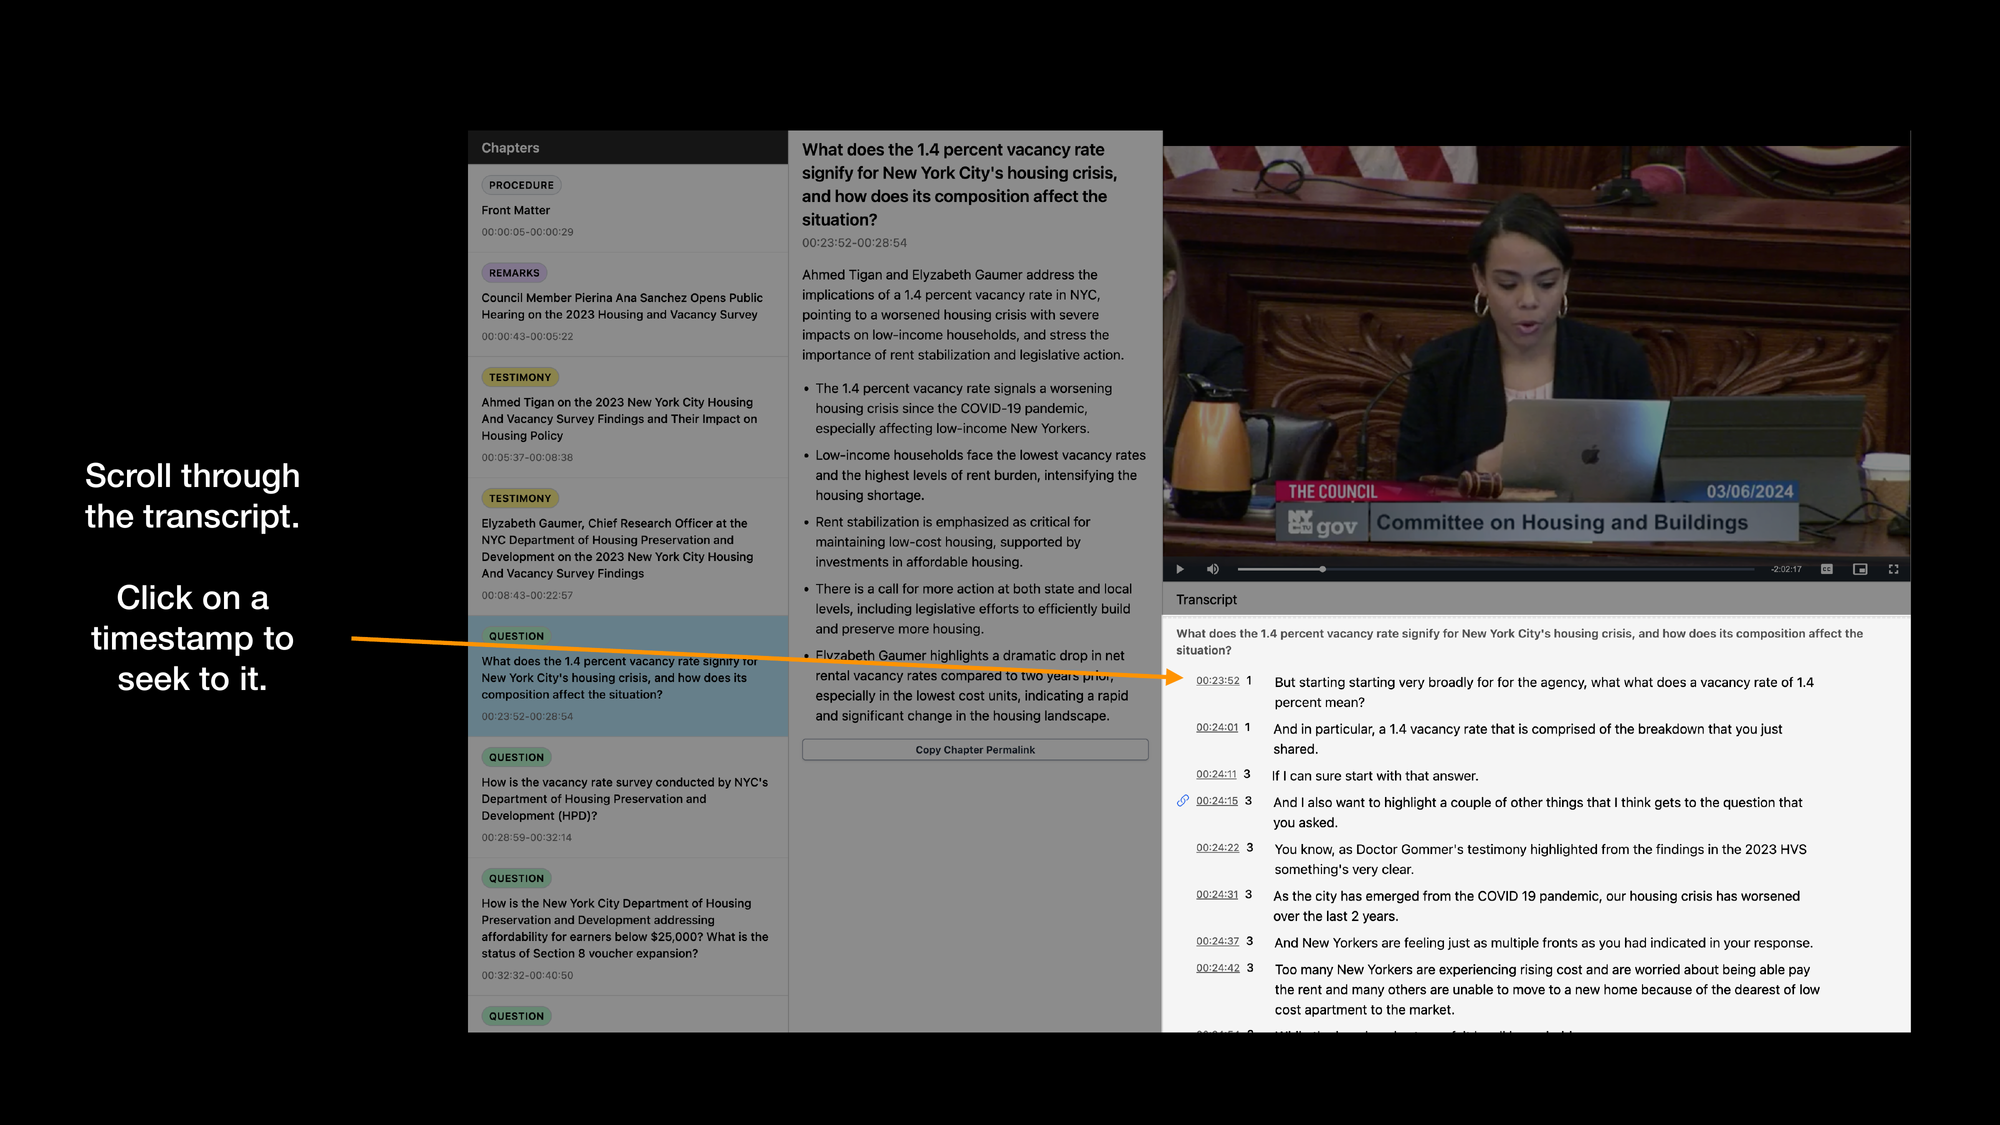 On the right, a screenshot of the Hearing on the 2023 Housing Vacancy Survey meeting on citymeetings.nyc. The transcript, on the bottom right, is highlighted. An arrow points to the transcript, showing the start of the chapter titled What does the 1.4% vacancy rate signify for NYCs housing crisis? in the transcript. The slide says Scroll through the transcript. Click on a timestamp to seek to it.